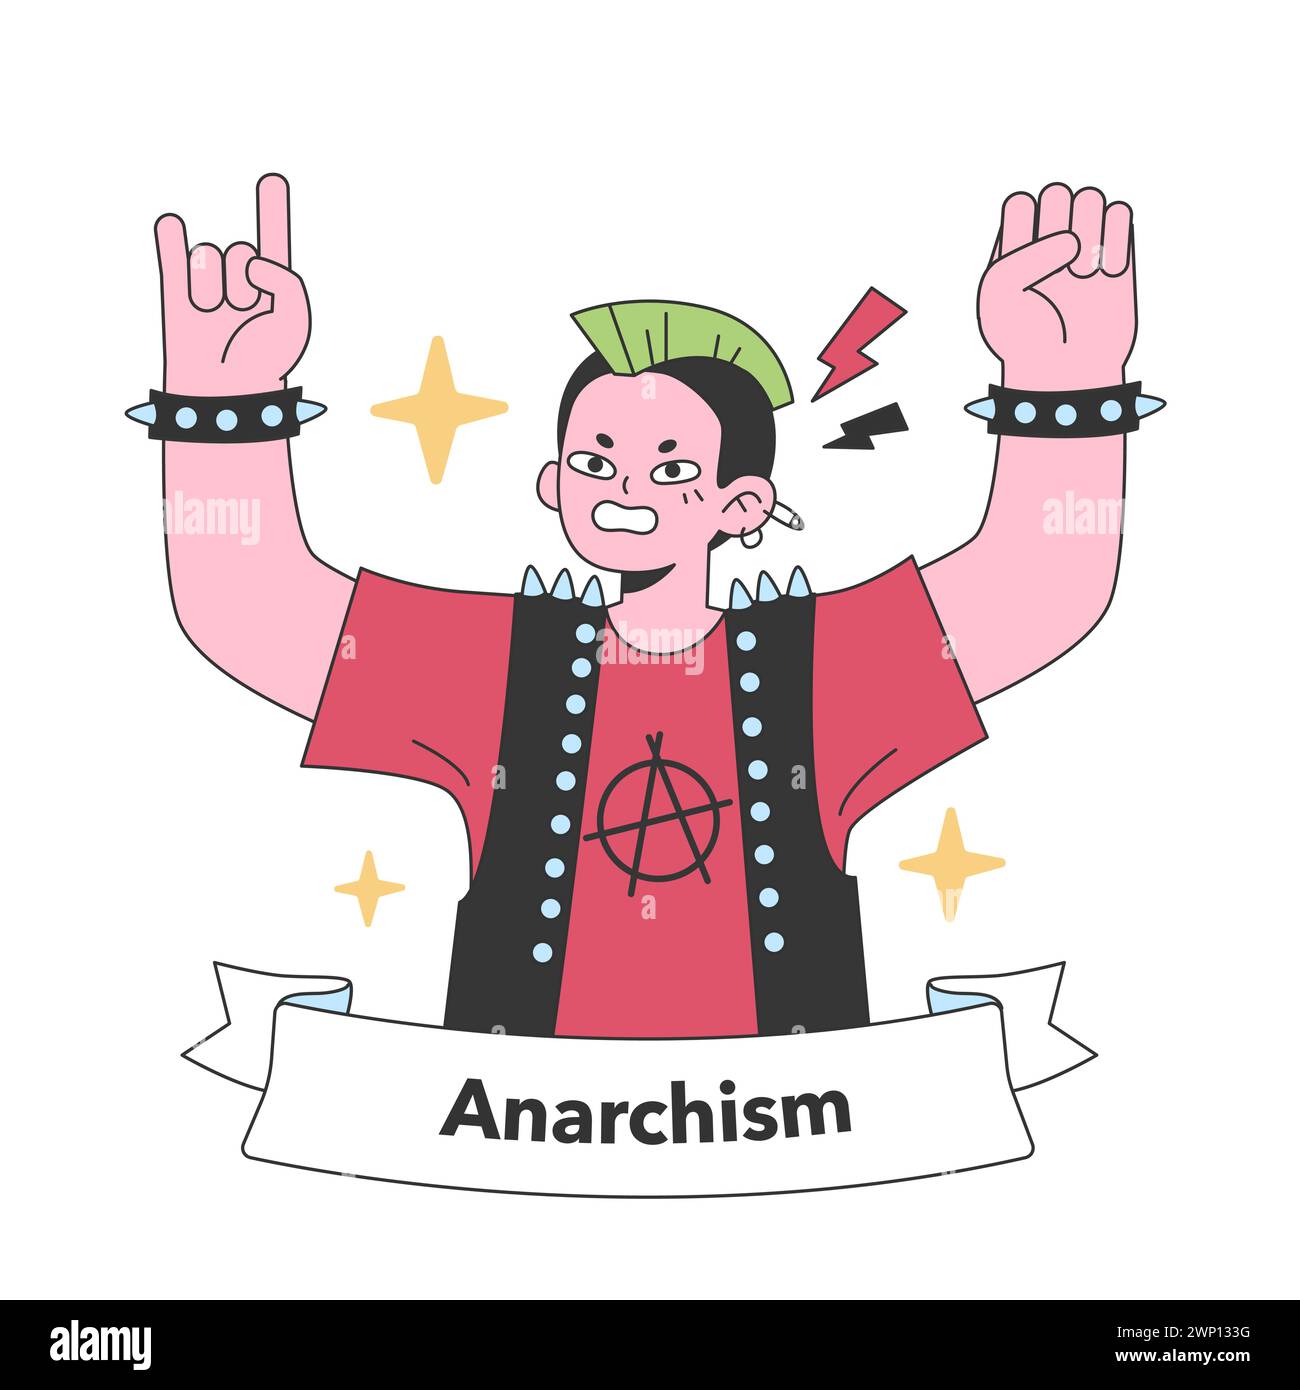 Emblematic anarchist figure raises fists high, symbolizing the fiery spirit of defiance and the quest for absolute freedom. Flat vector illustration Stock Vector